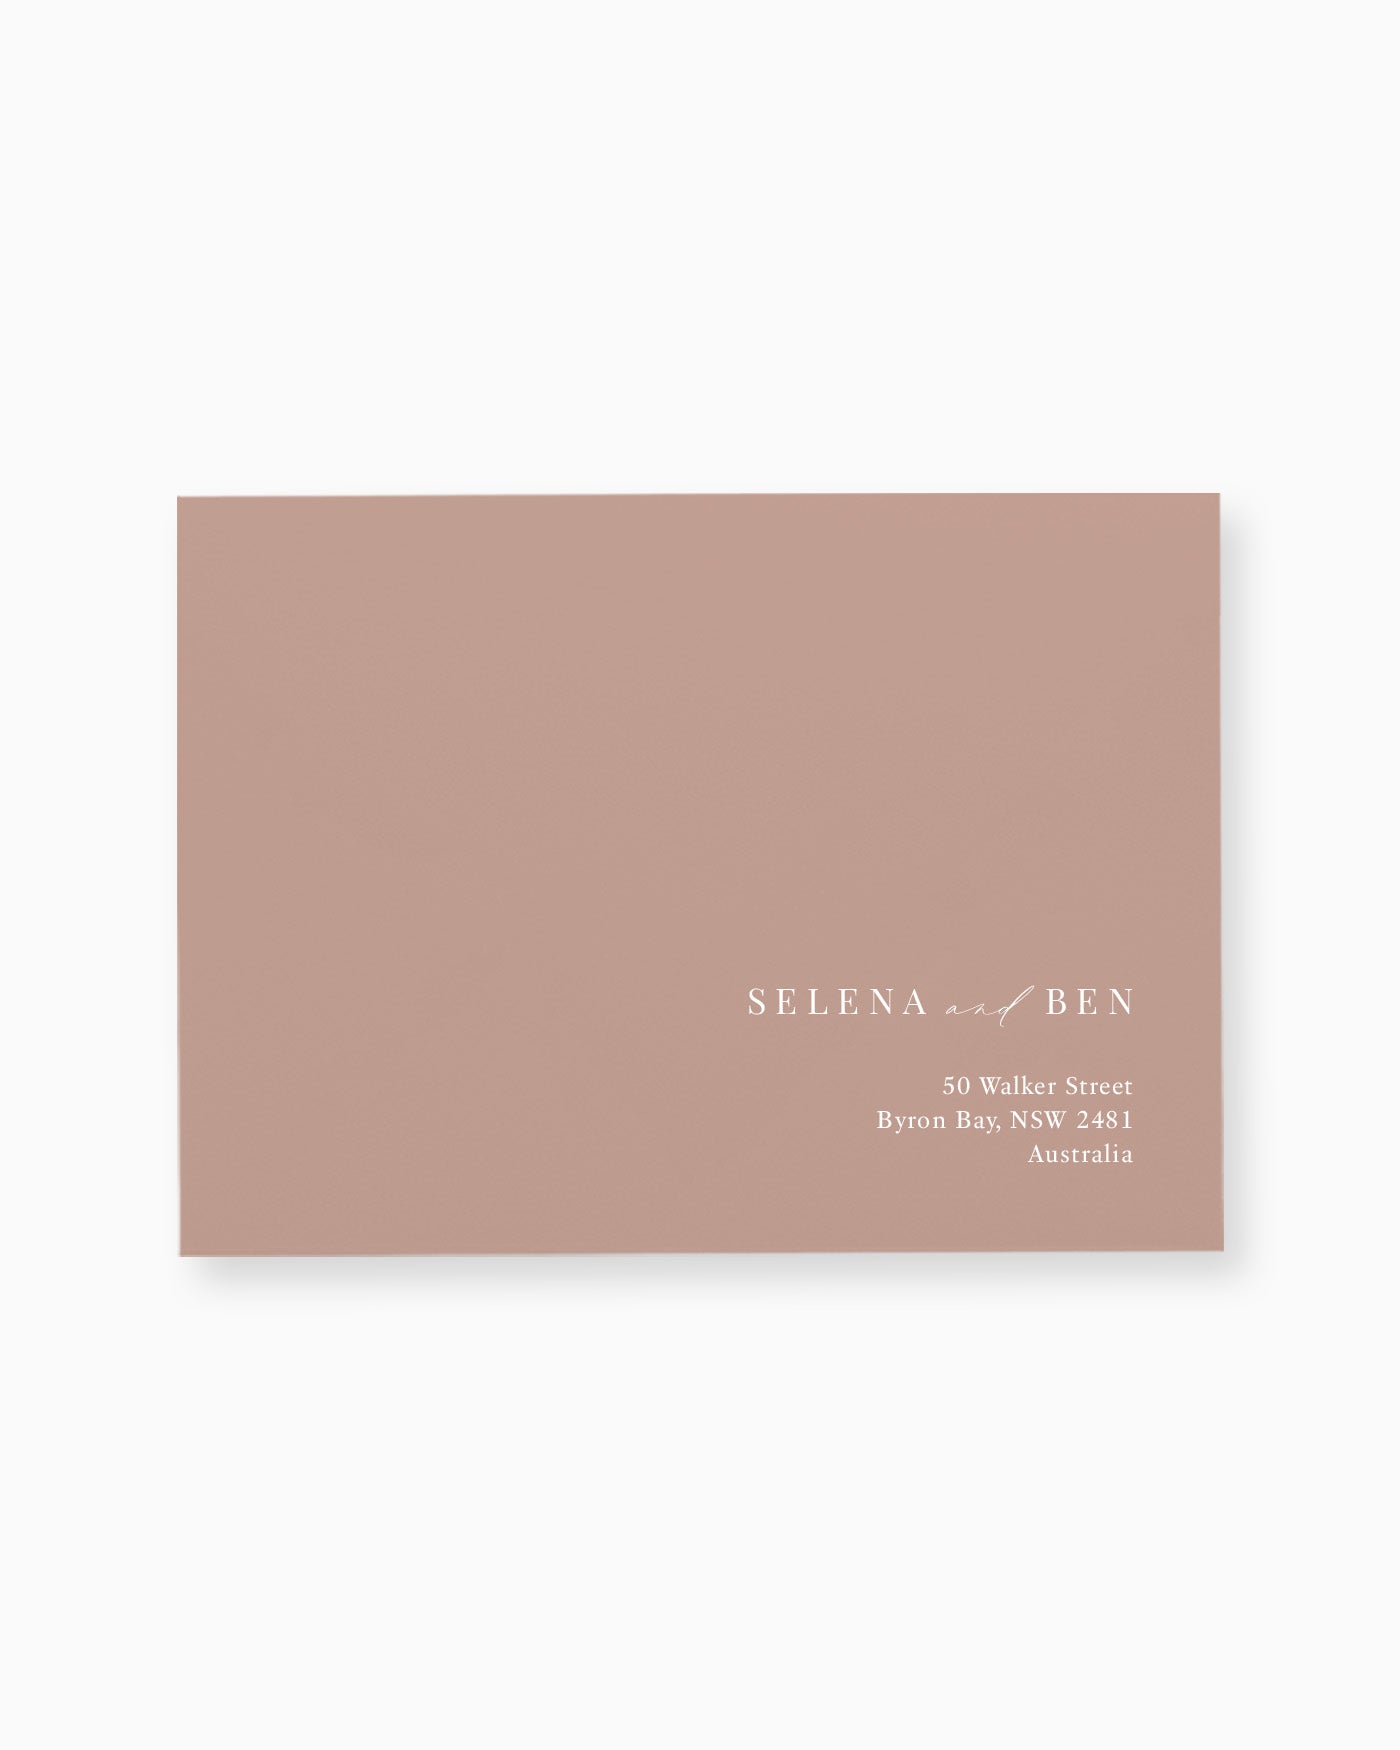 Peppermint Press Stationery Suite Soleil Envelope Printing